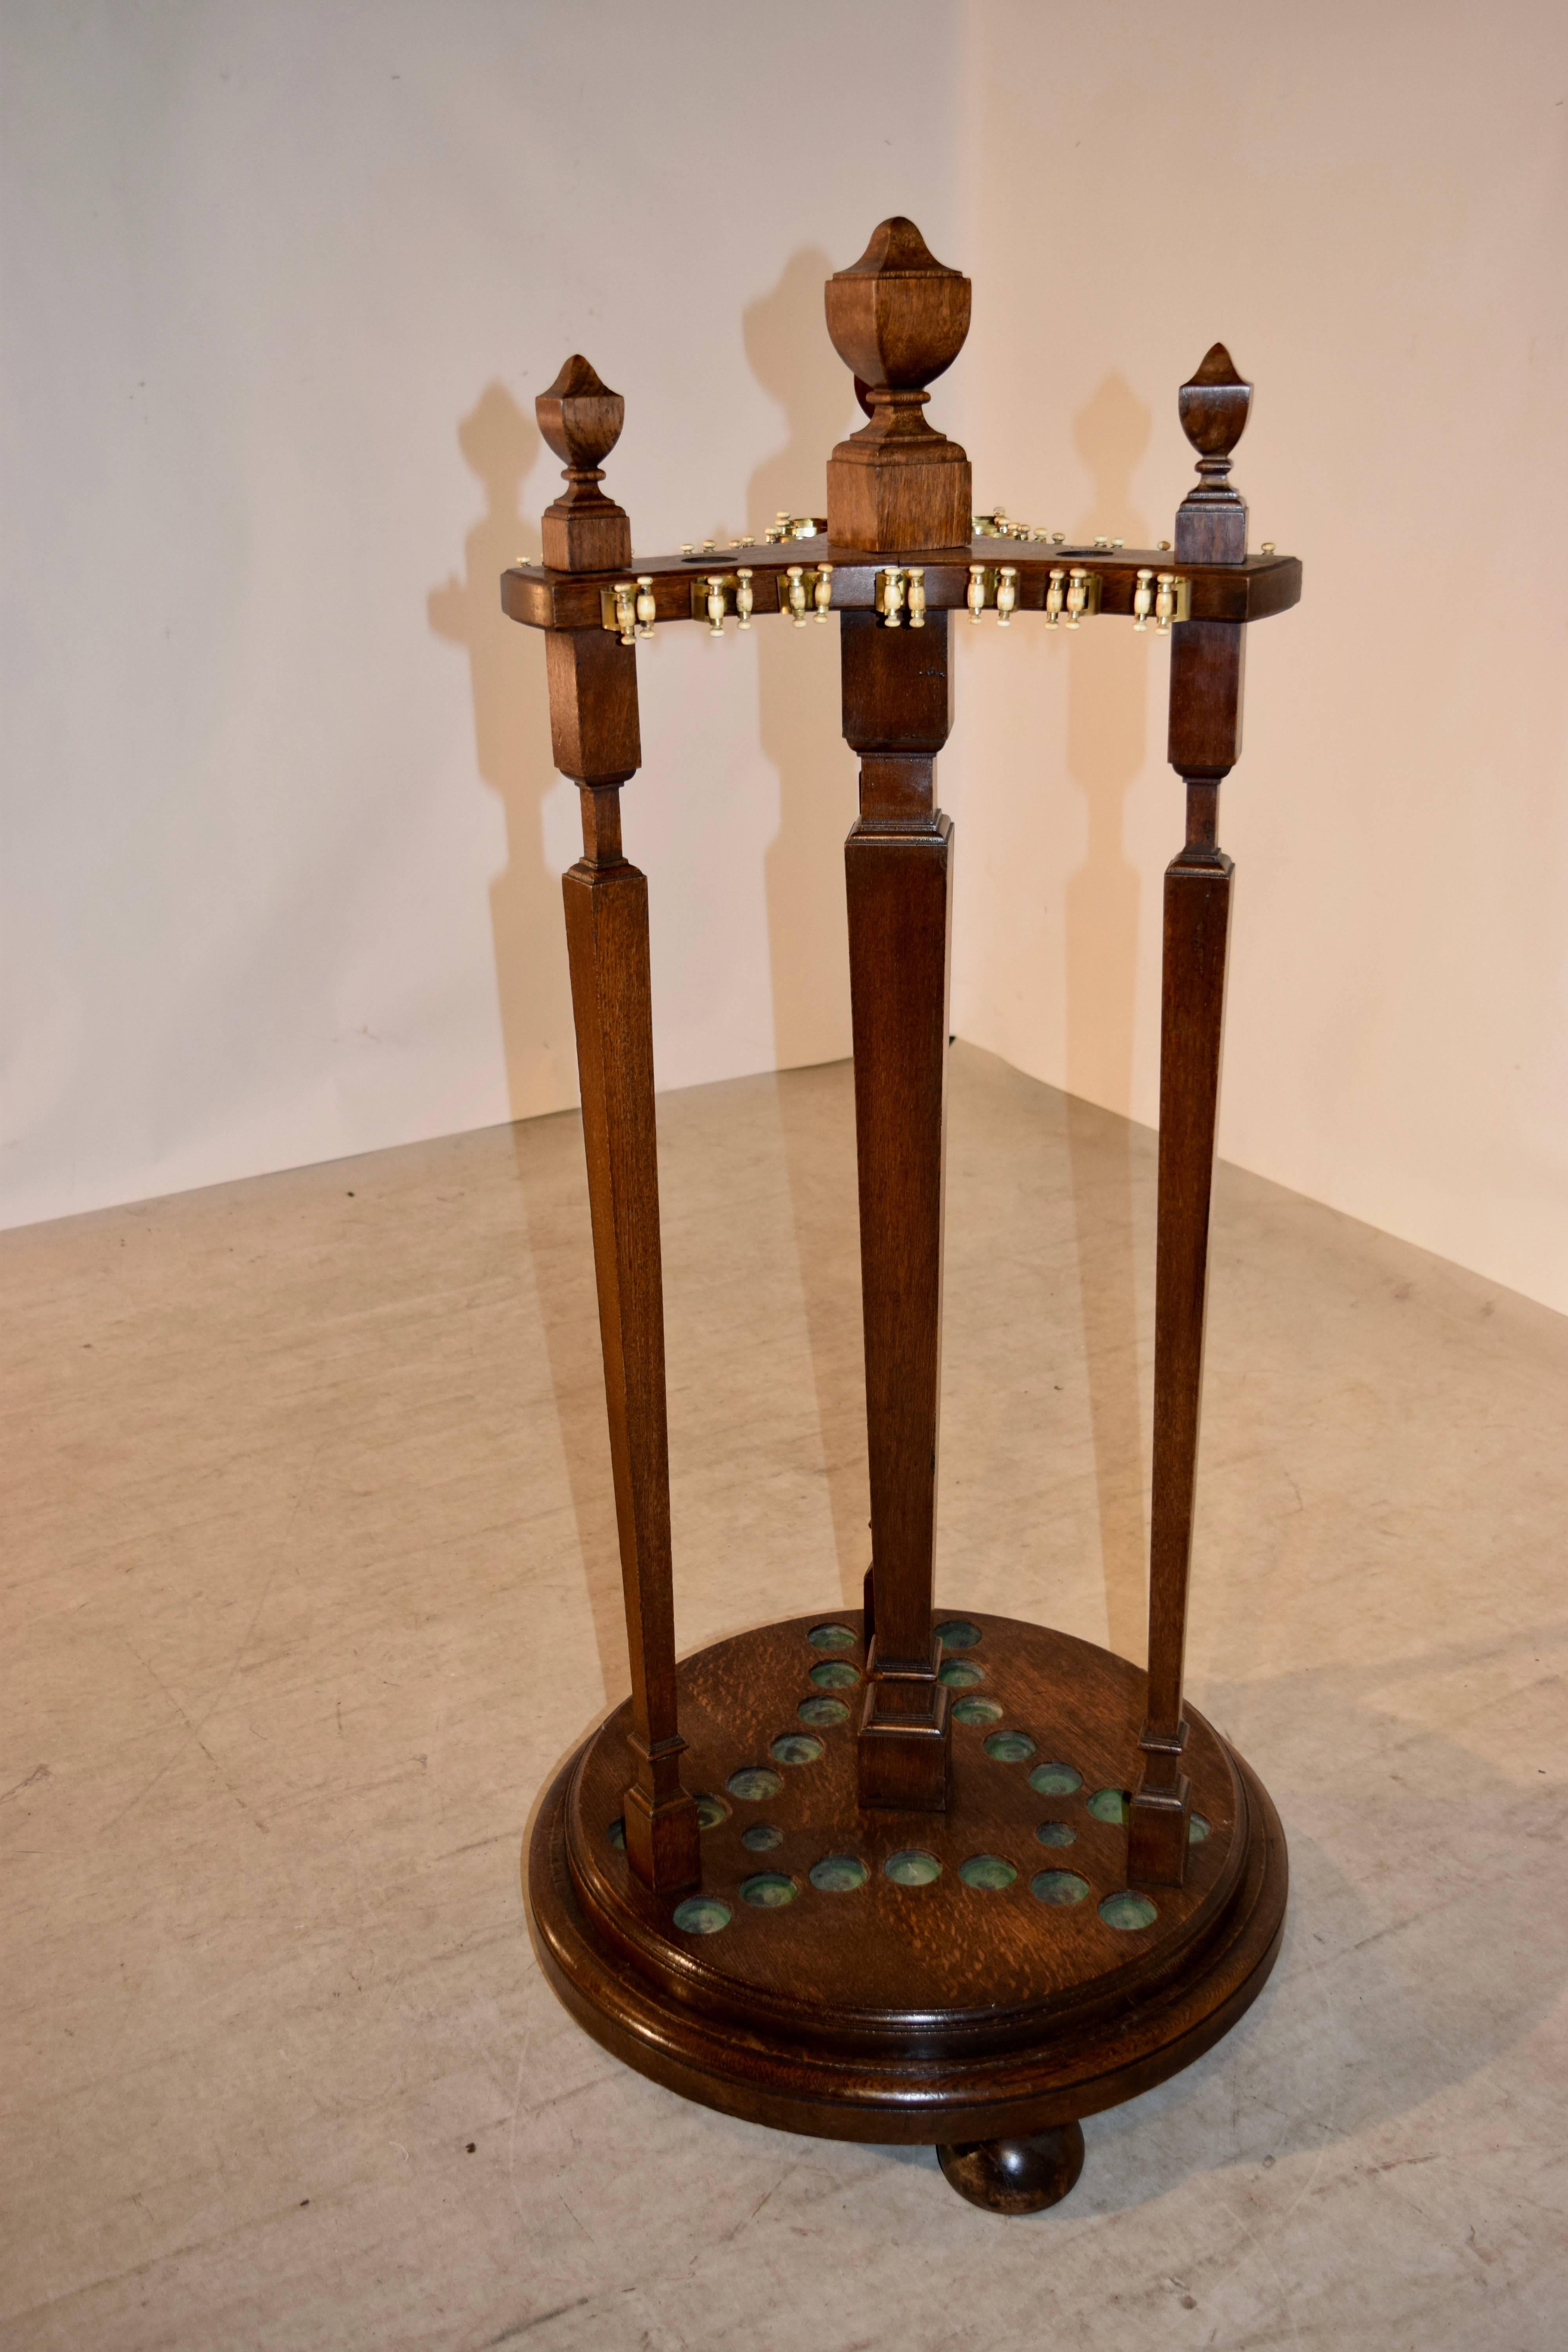 Late 19th century solid oak billiard, snooker, or pool cue stand of nice size and quality. It is a carousel design standing on a molded revolving turntable base, supported on hand turned bun feet. The stand is supported by a central hand turned